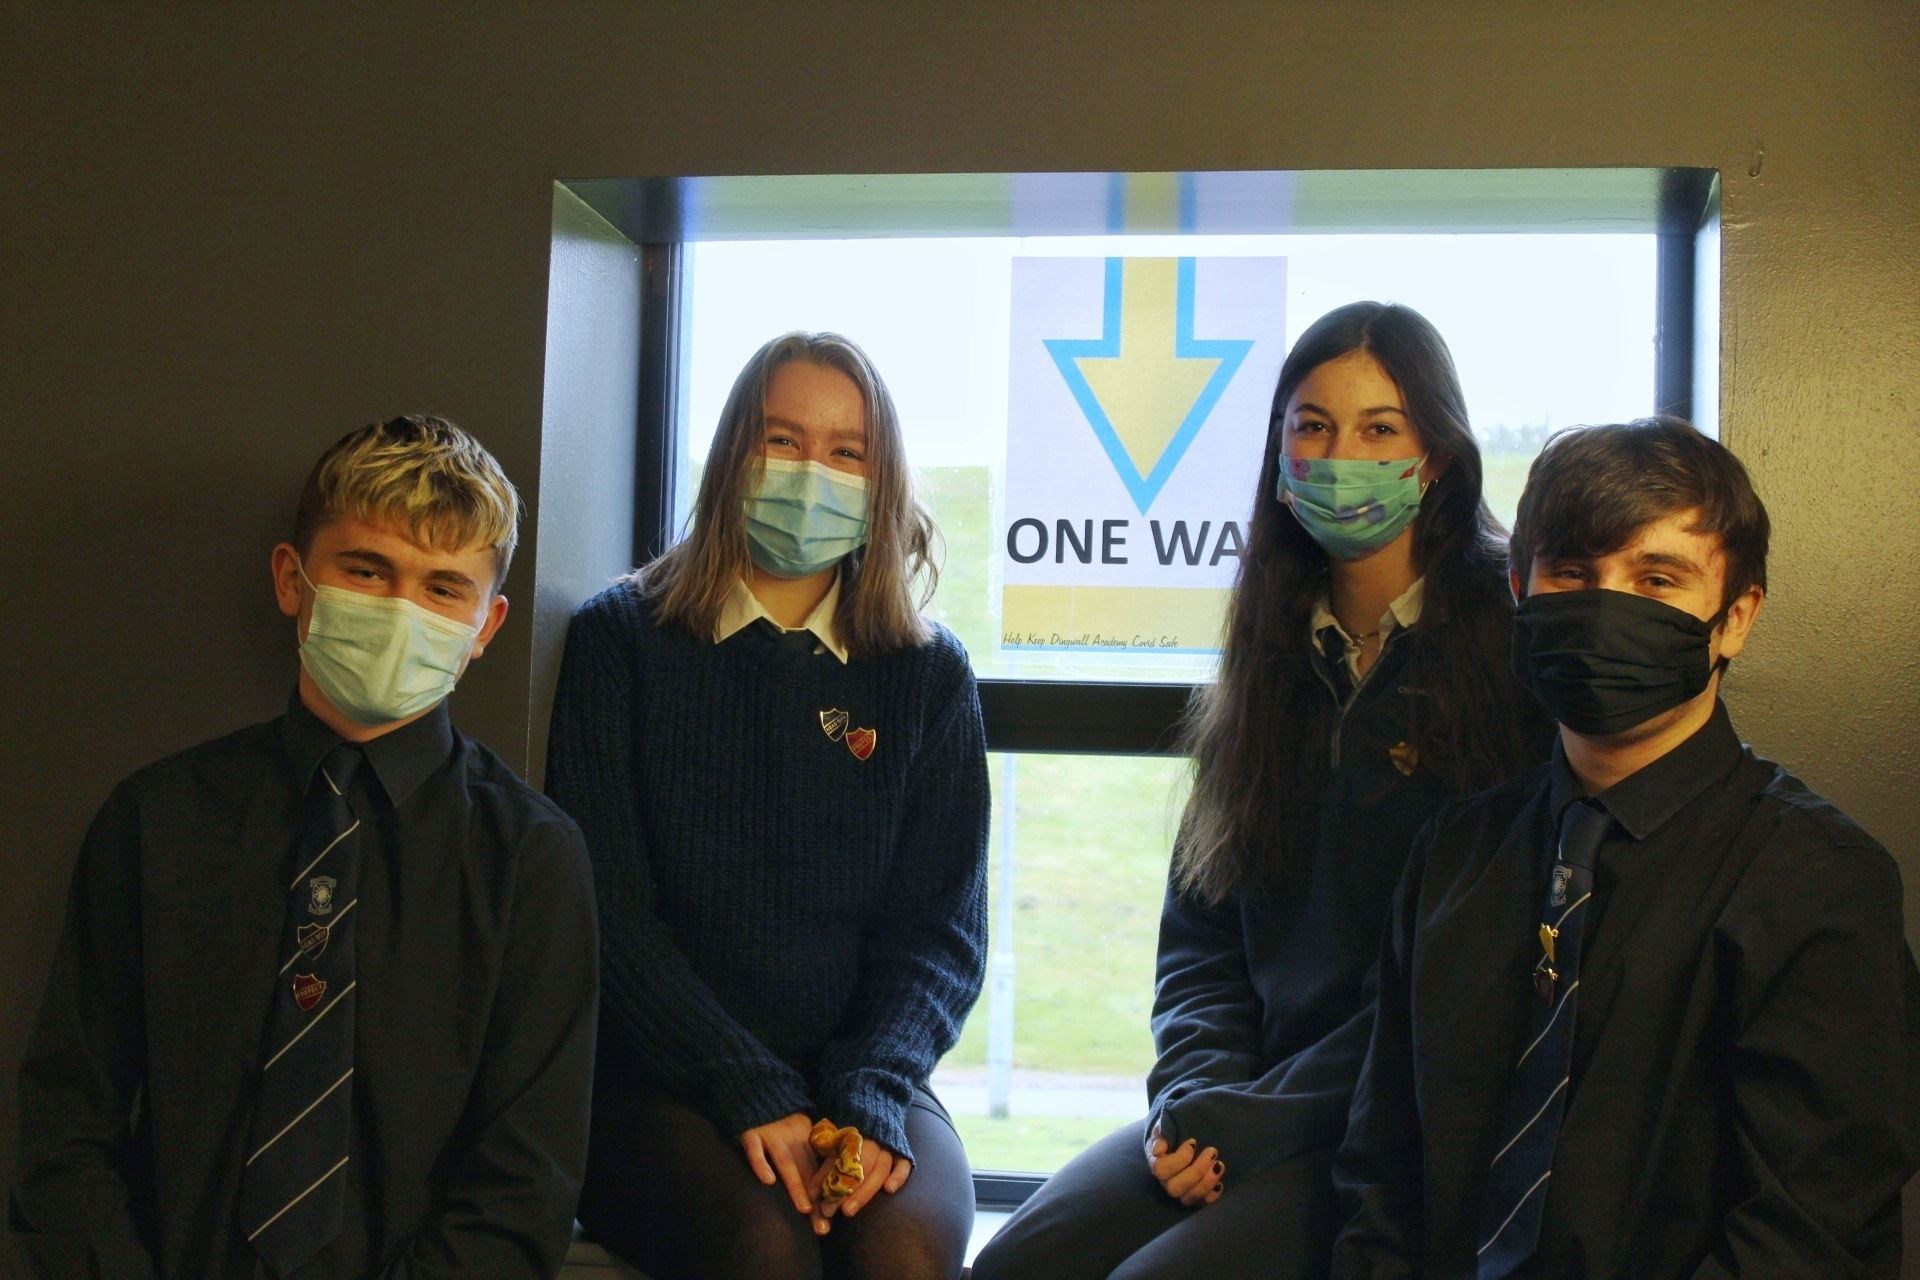 Ross Stewart, Kirsty Arnaud, Elsa Fearn and Ruairidh McGee in one of the school stairwells. As part of the one-way system, all stairwells are up or down only. Pupils wear masks when walking between classes. Picture: Melvine Lynch